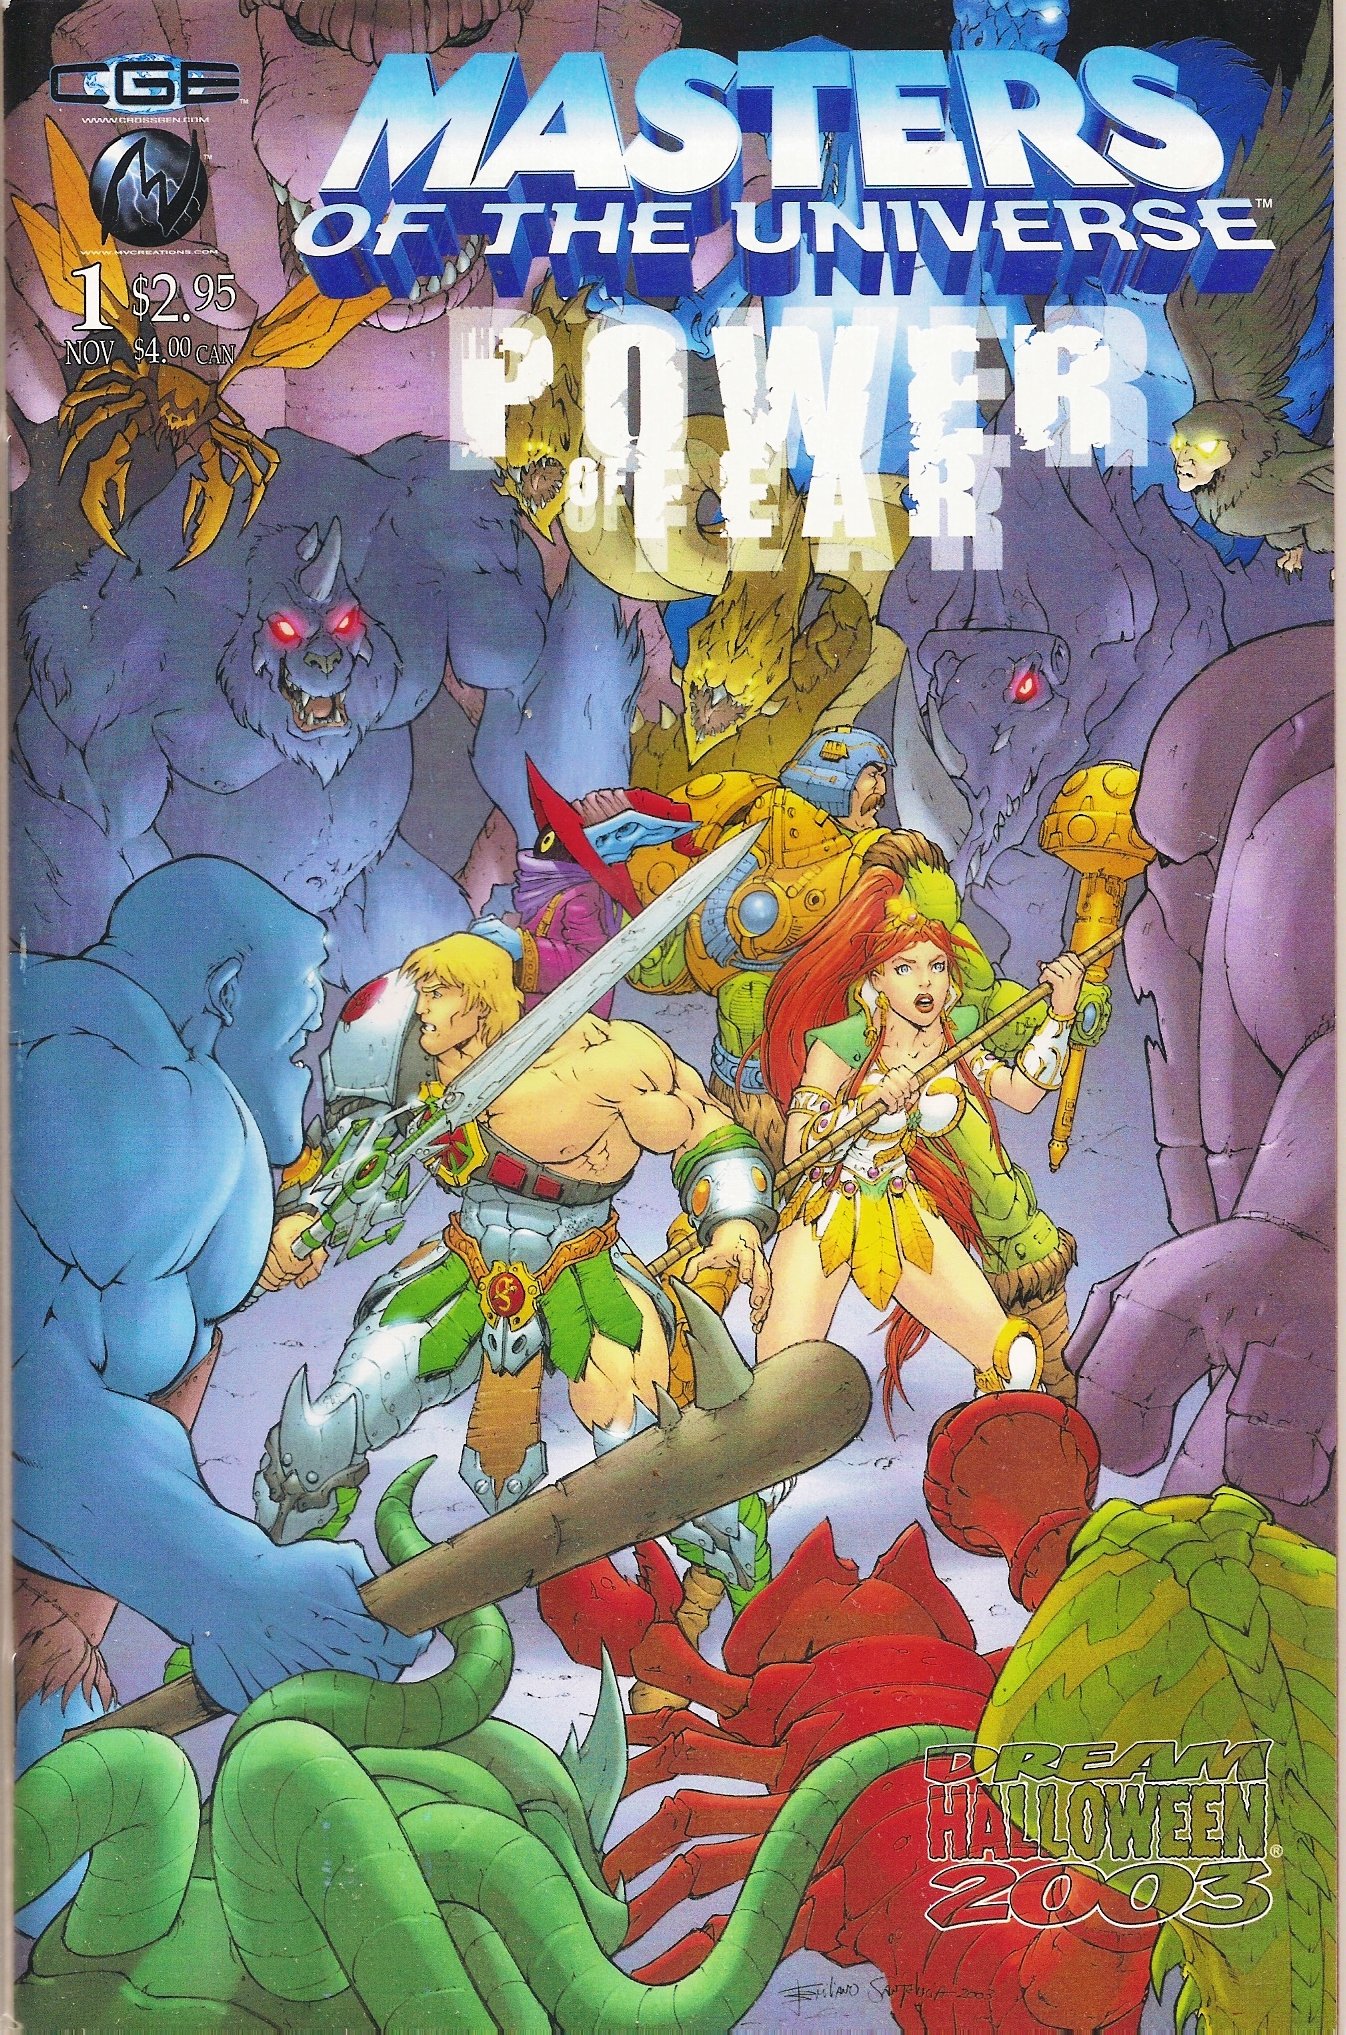 He-Man & Masters of the Universe Power of Fear #1